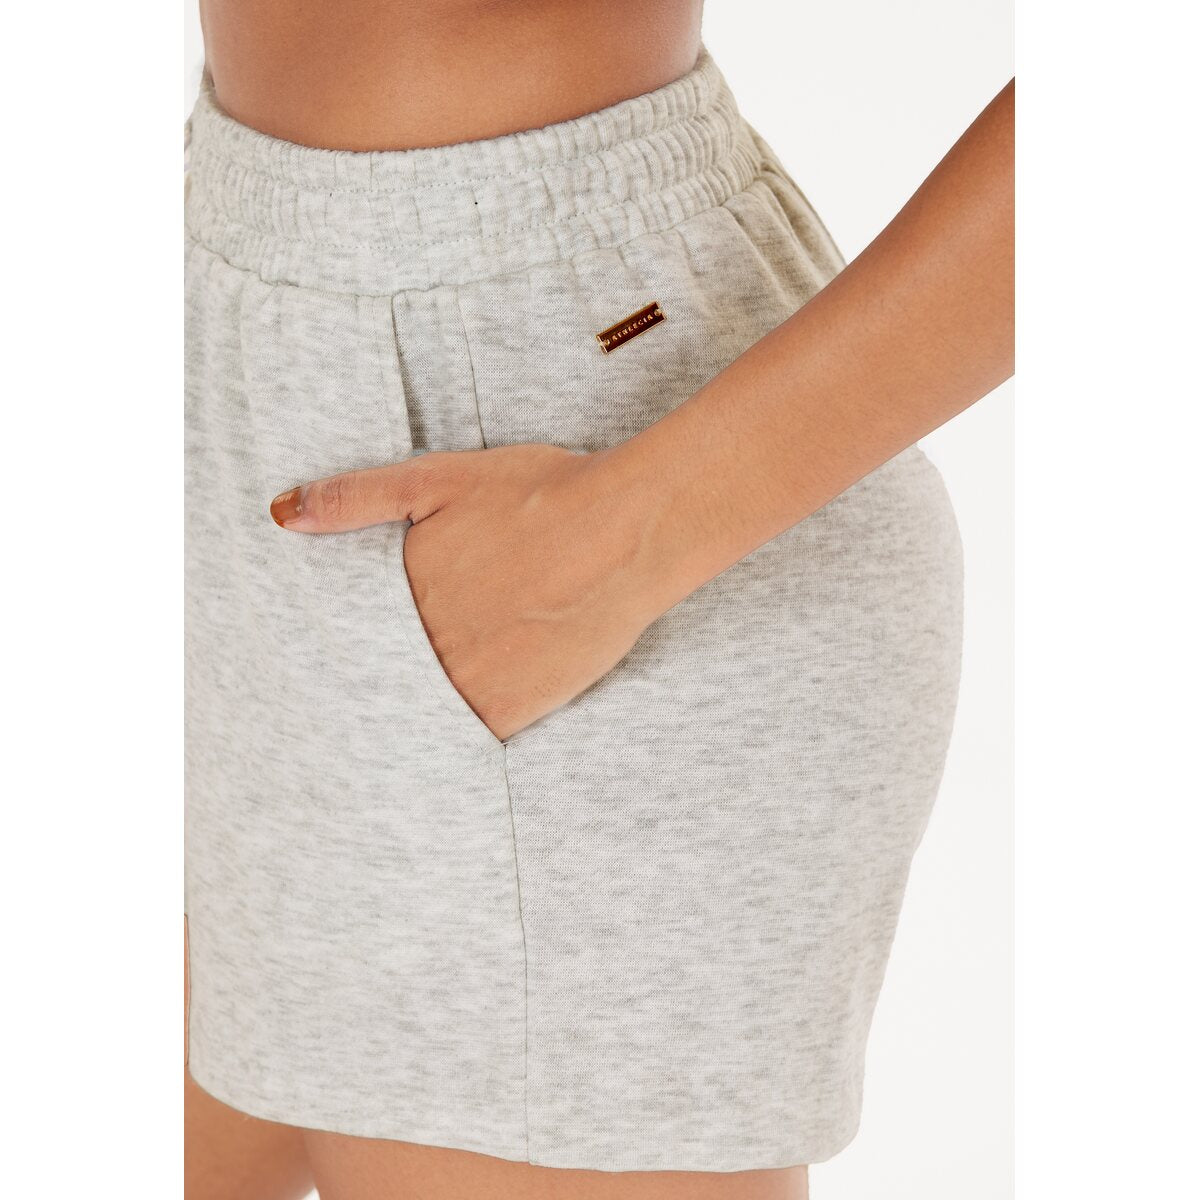 Athlecia Ruthie Womenswear Shorts 7 Shaws Department Stores